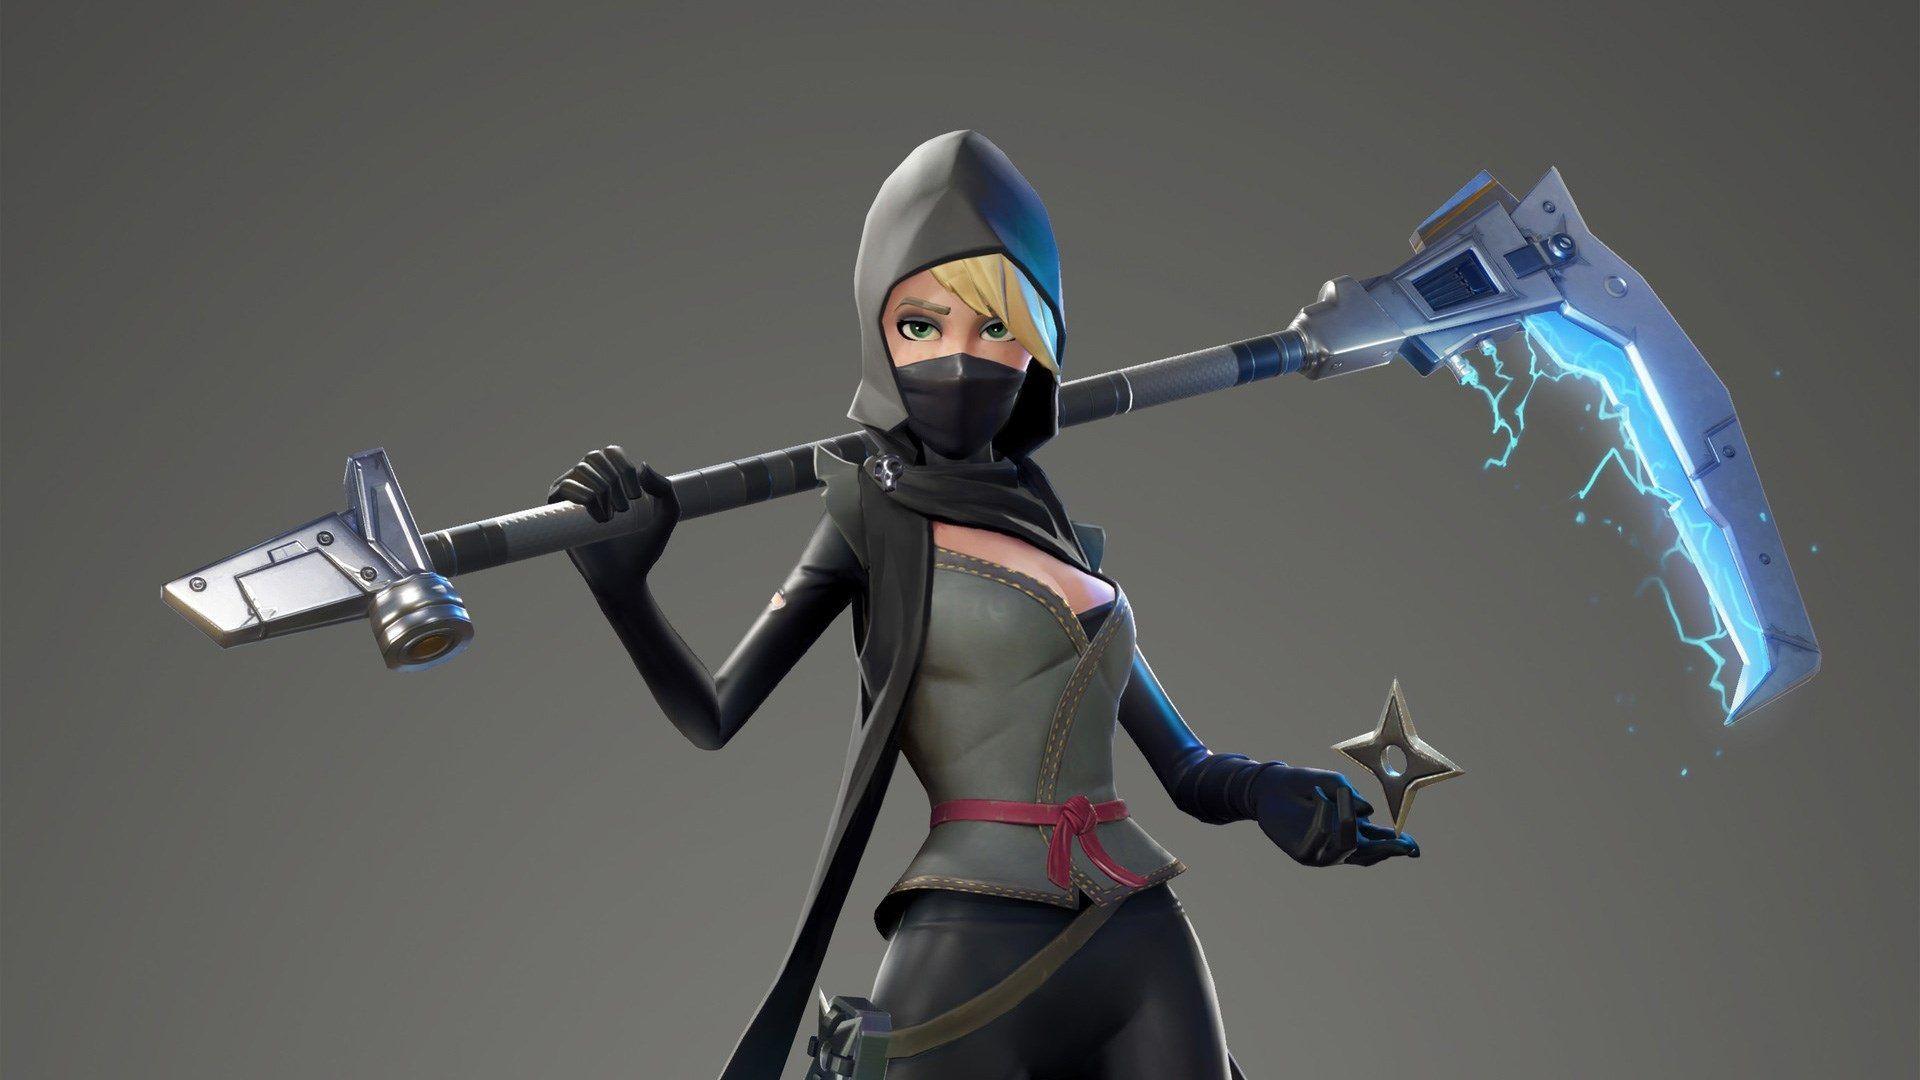 Can we get this skin in Battle Royale?